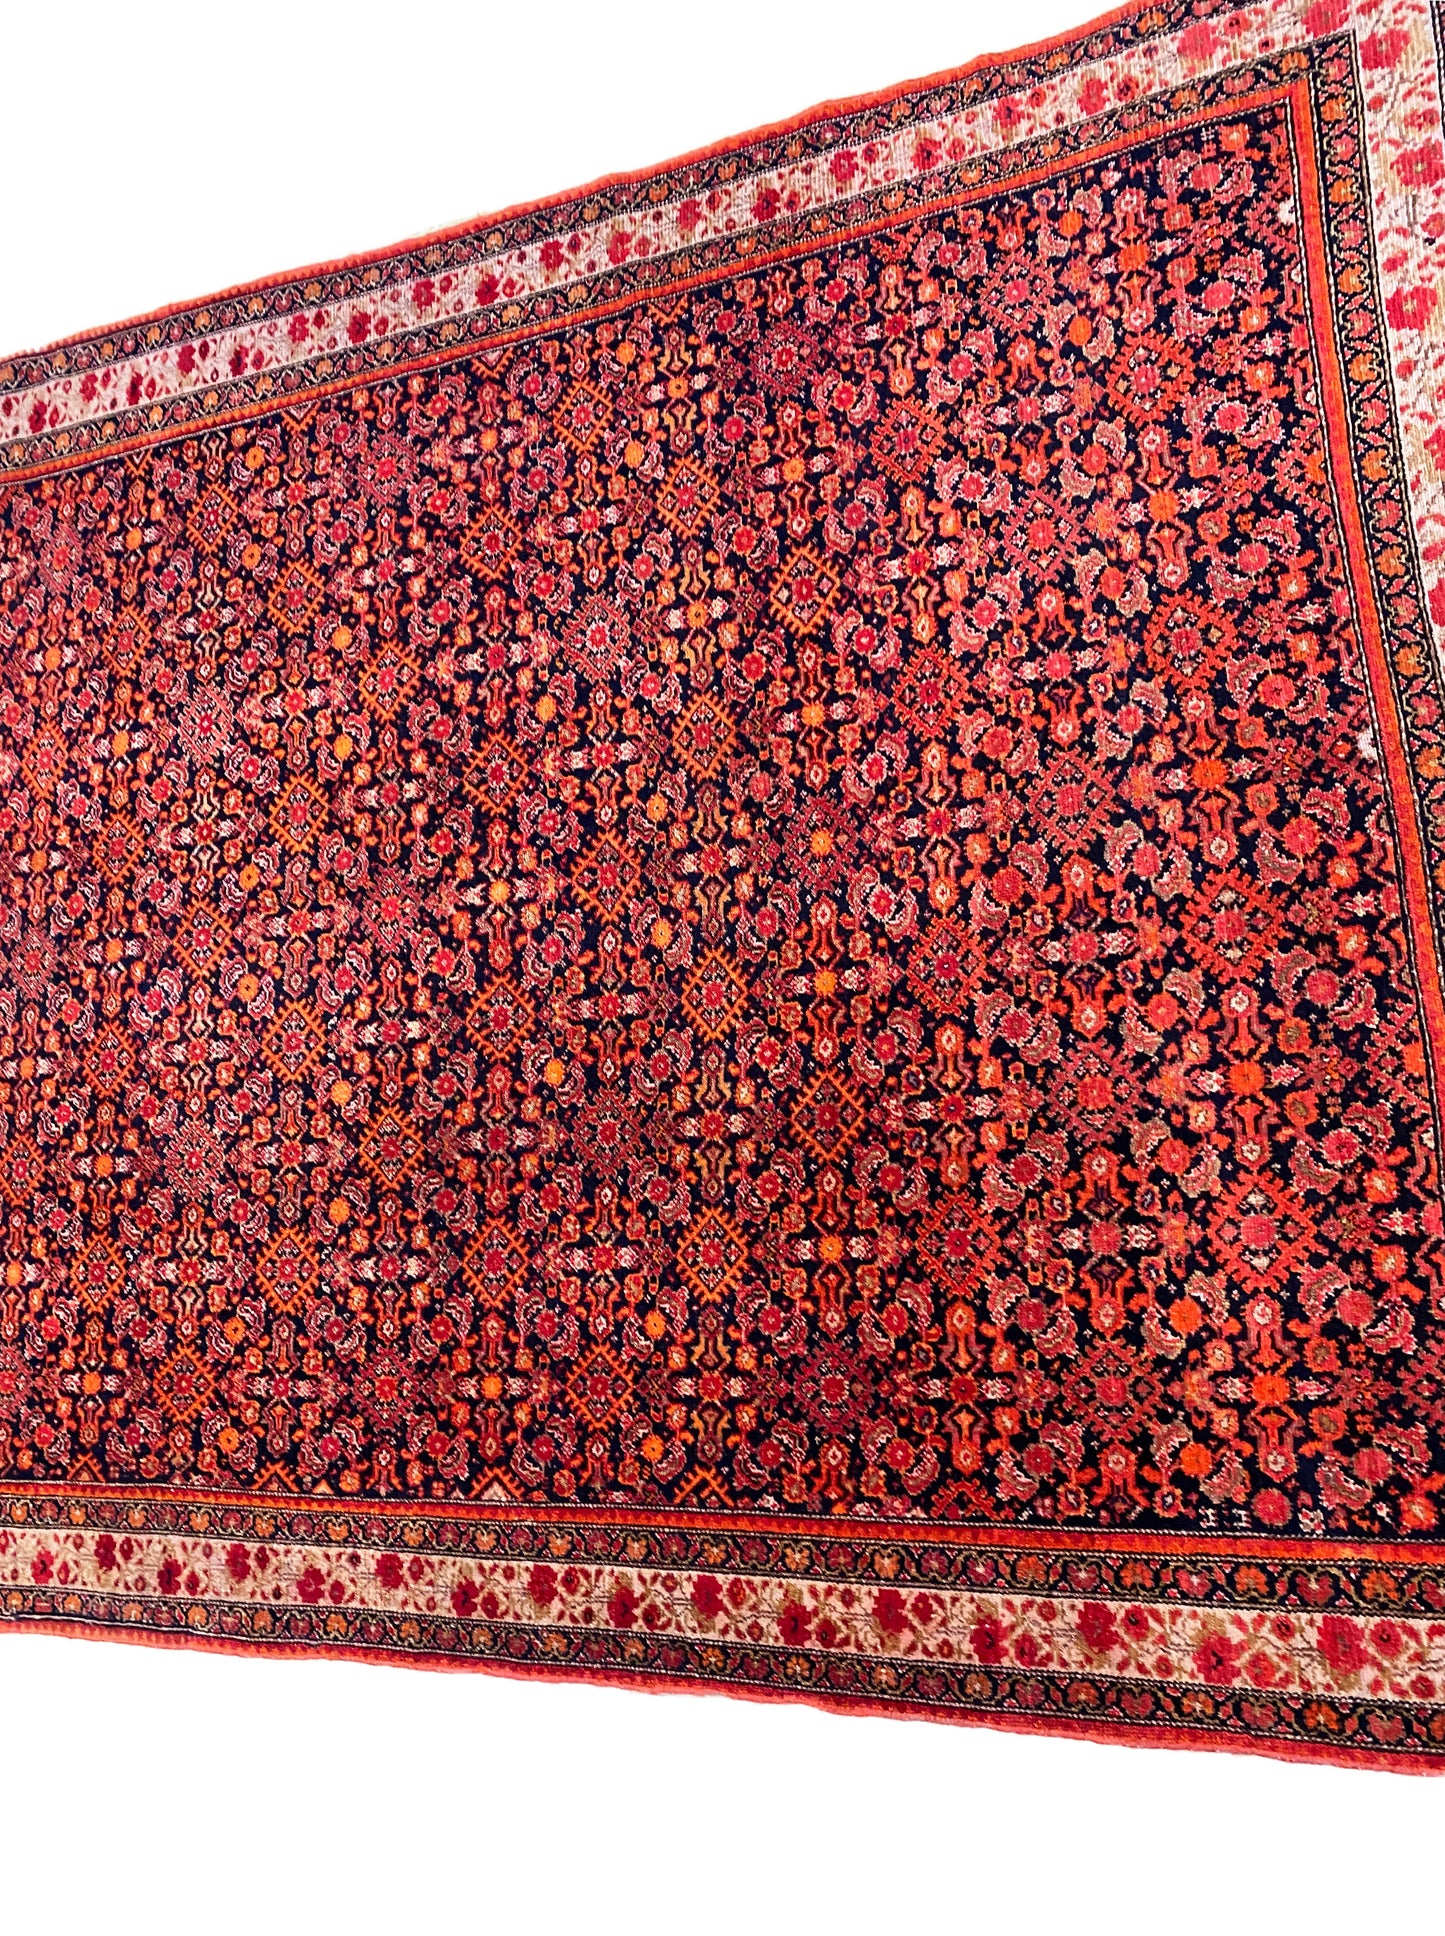 #3066 Antique Fereghan Rug 6.4' by 4.75'